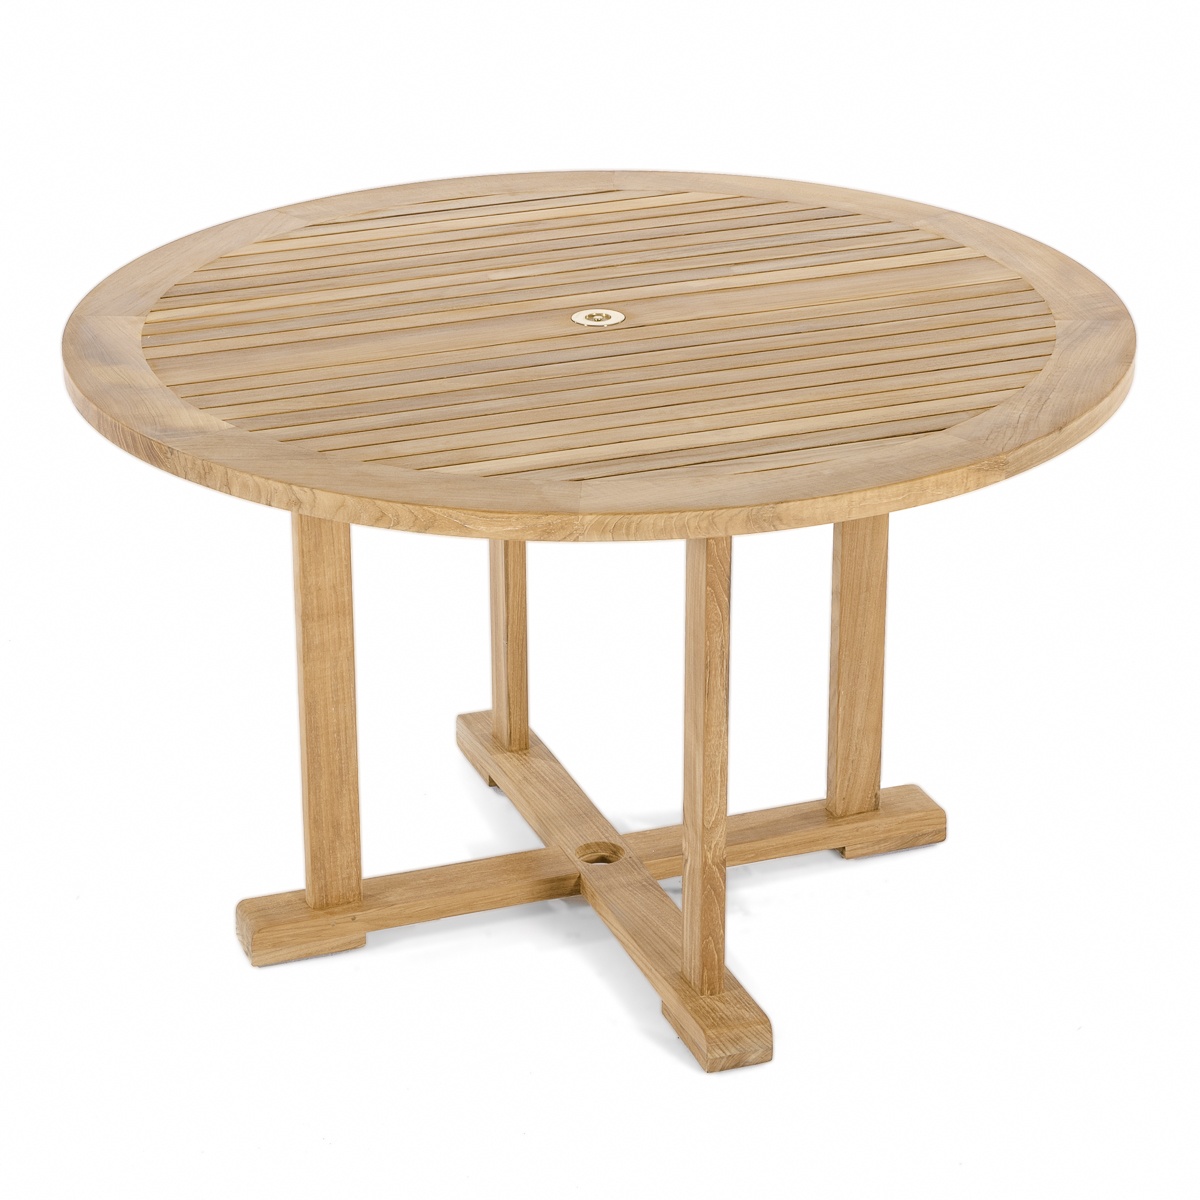 48 In Round Teak Table Westminster, Round Teak Dining Table Outdoor